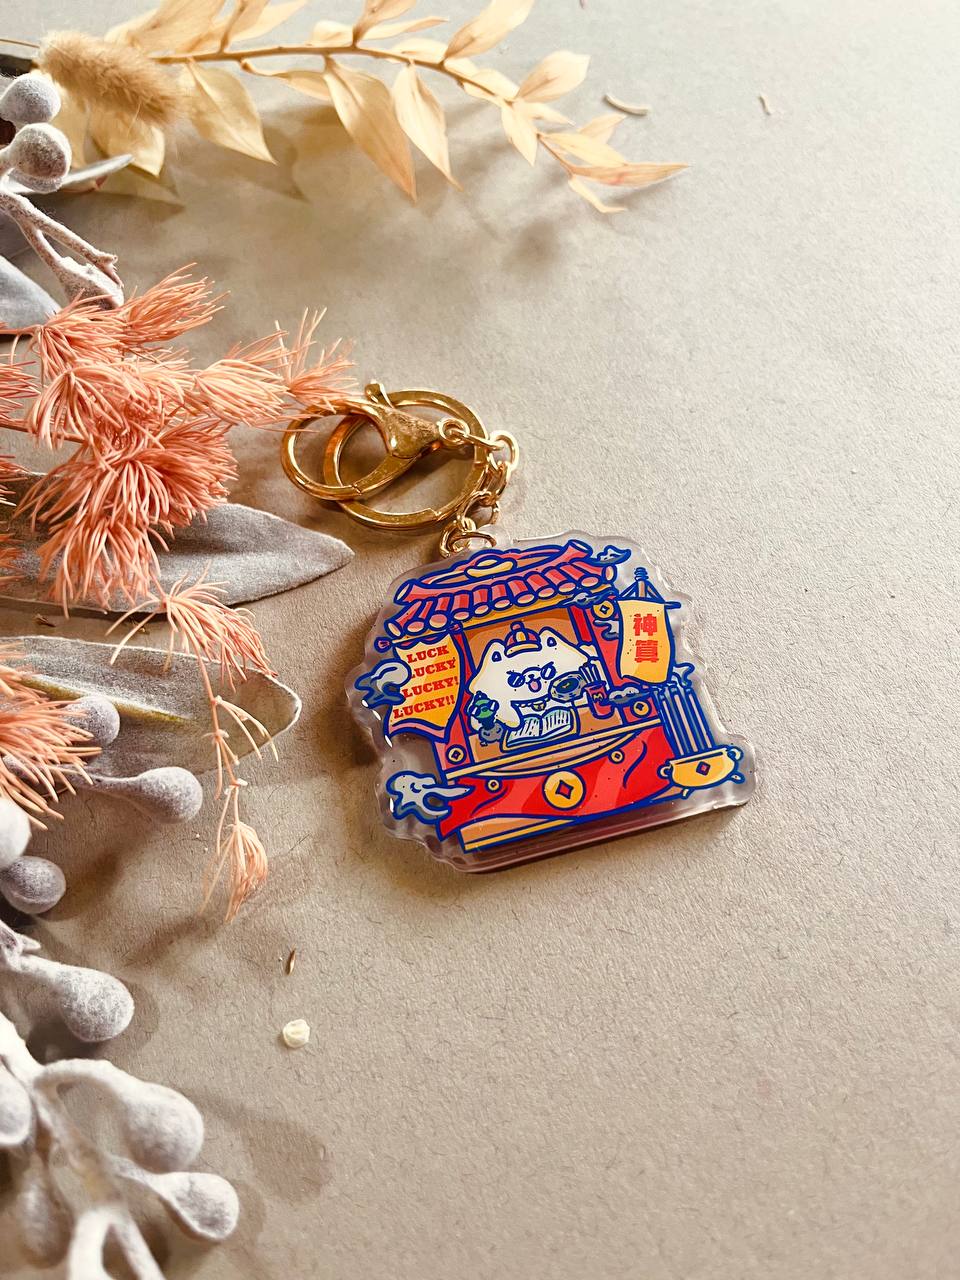 Fortune Telling Acrylic Charm (Fortune Telling)